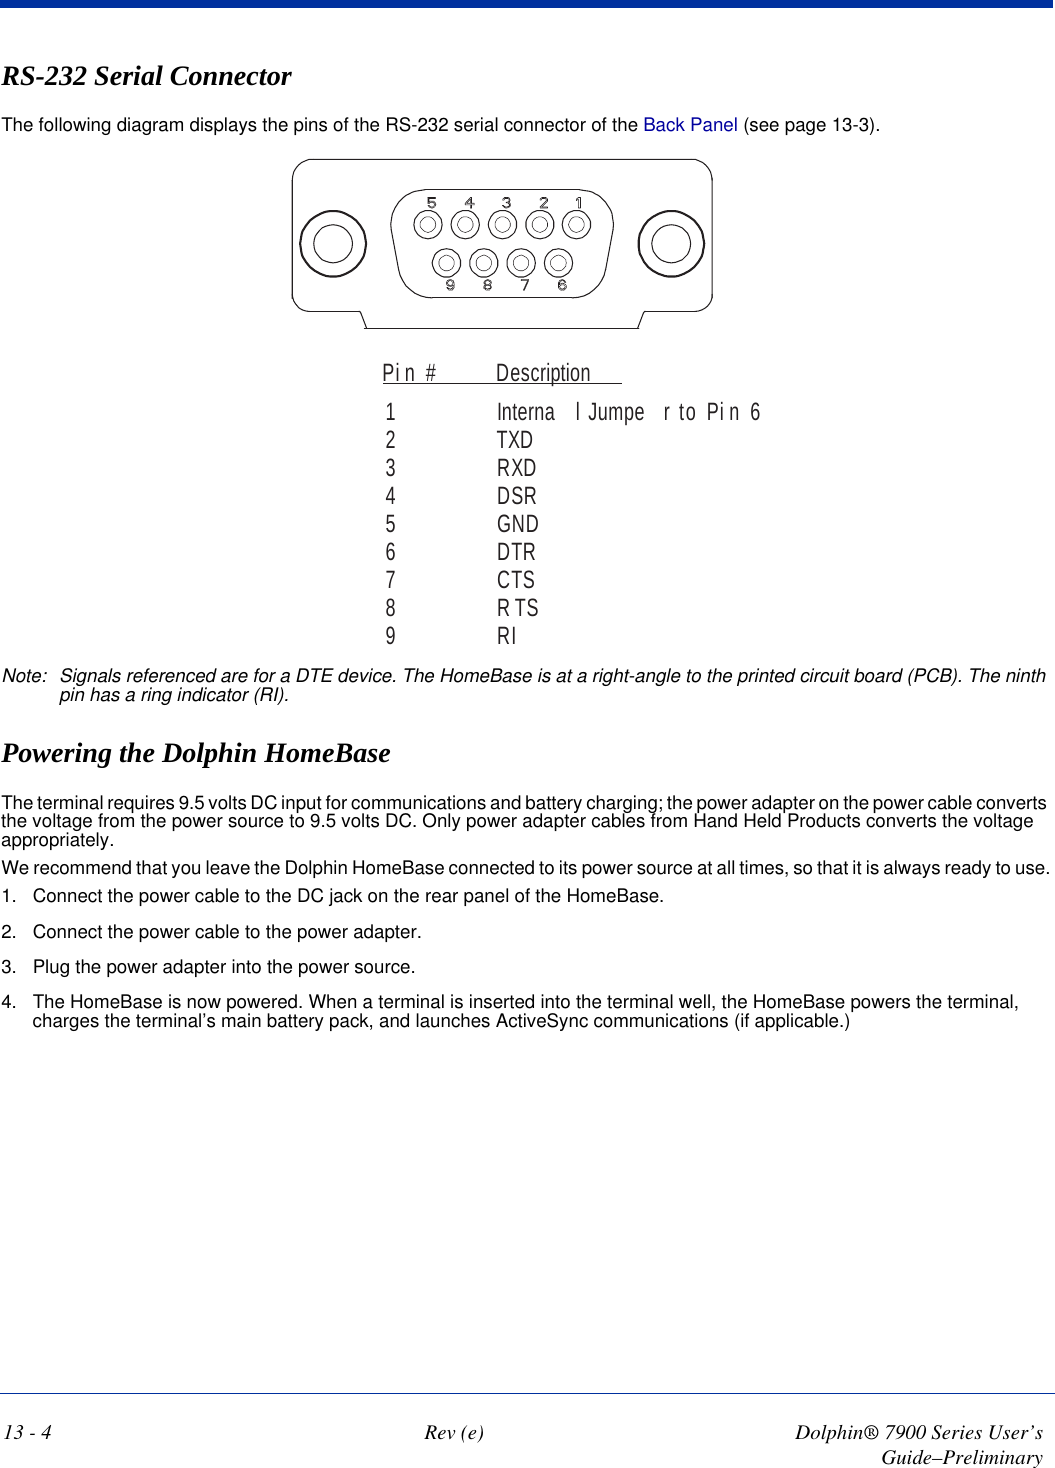 13 - 4 Rev (e) Dolphin® 7900 Series User’s Guide–PreliminaryRS-232 Serial ConnectorThe following diagram displays the pins of the RS-232 serial connector of the Back Panel (see page 13-3). Pi n # Description1 Interna l Jumpe r to Pi n 62TXD3RXD4DSR5GND6DTR7CTS8RTS9RINote: Signals referenced are for a DTE device. The HomeBase is at a right-angle to the printed circuit board (PCB). The ninth pin has a ring indicator (RI).Powering the Dolphin HomeBaseThe terminal requires 9.5 volts DC input for communications and battery charging; the power adapter on the power cable converts the voltage from the power source to 9.5 volts DC. Only power adapter cables from Hand Held Products converts the voltage appropriately.We recommend that you leave the Dolphin HomeBase connected to its power source at all times, so that it is always ready to use.1. Connect the power cable to the DC jack on the rear panel of the HomeBase. 2. Connect the power cable to the power adapter.3. Plug the power adapter into the power source.4. The HomeBase is now powered. When a terminal is inserted into the terminal well, the HomeBase powers the terminal, charges the terminal’s main battery pack, and launches ActiveSync communications (if applicable.) 